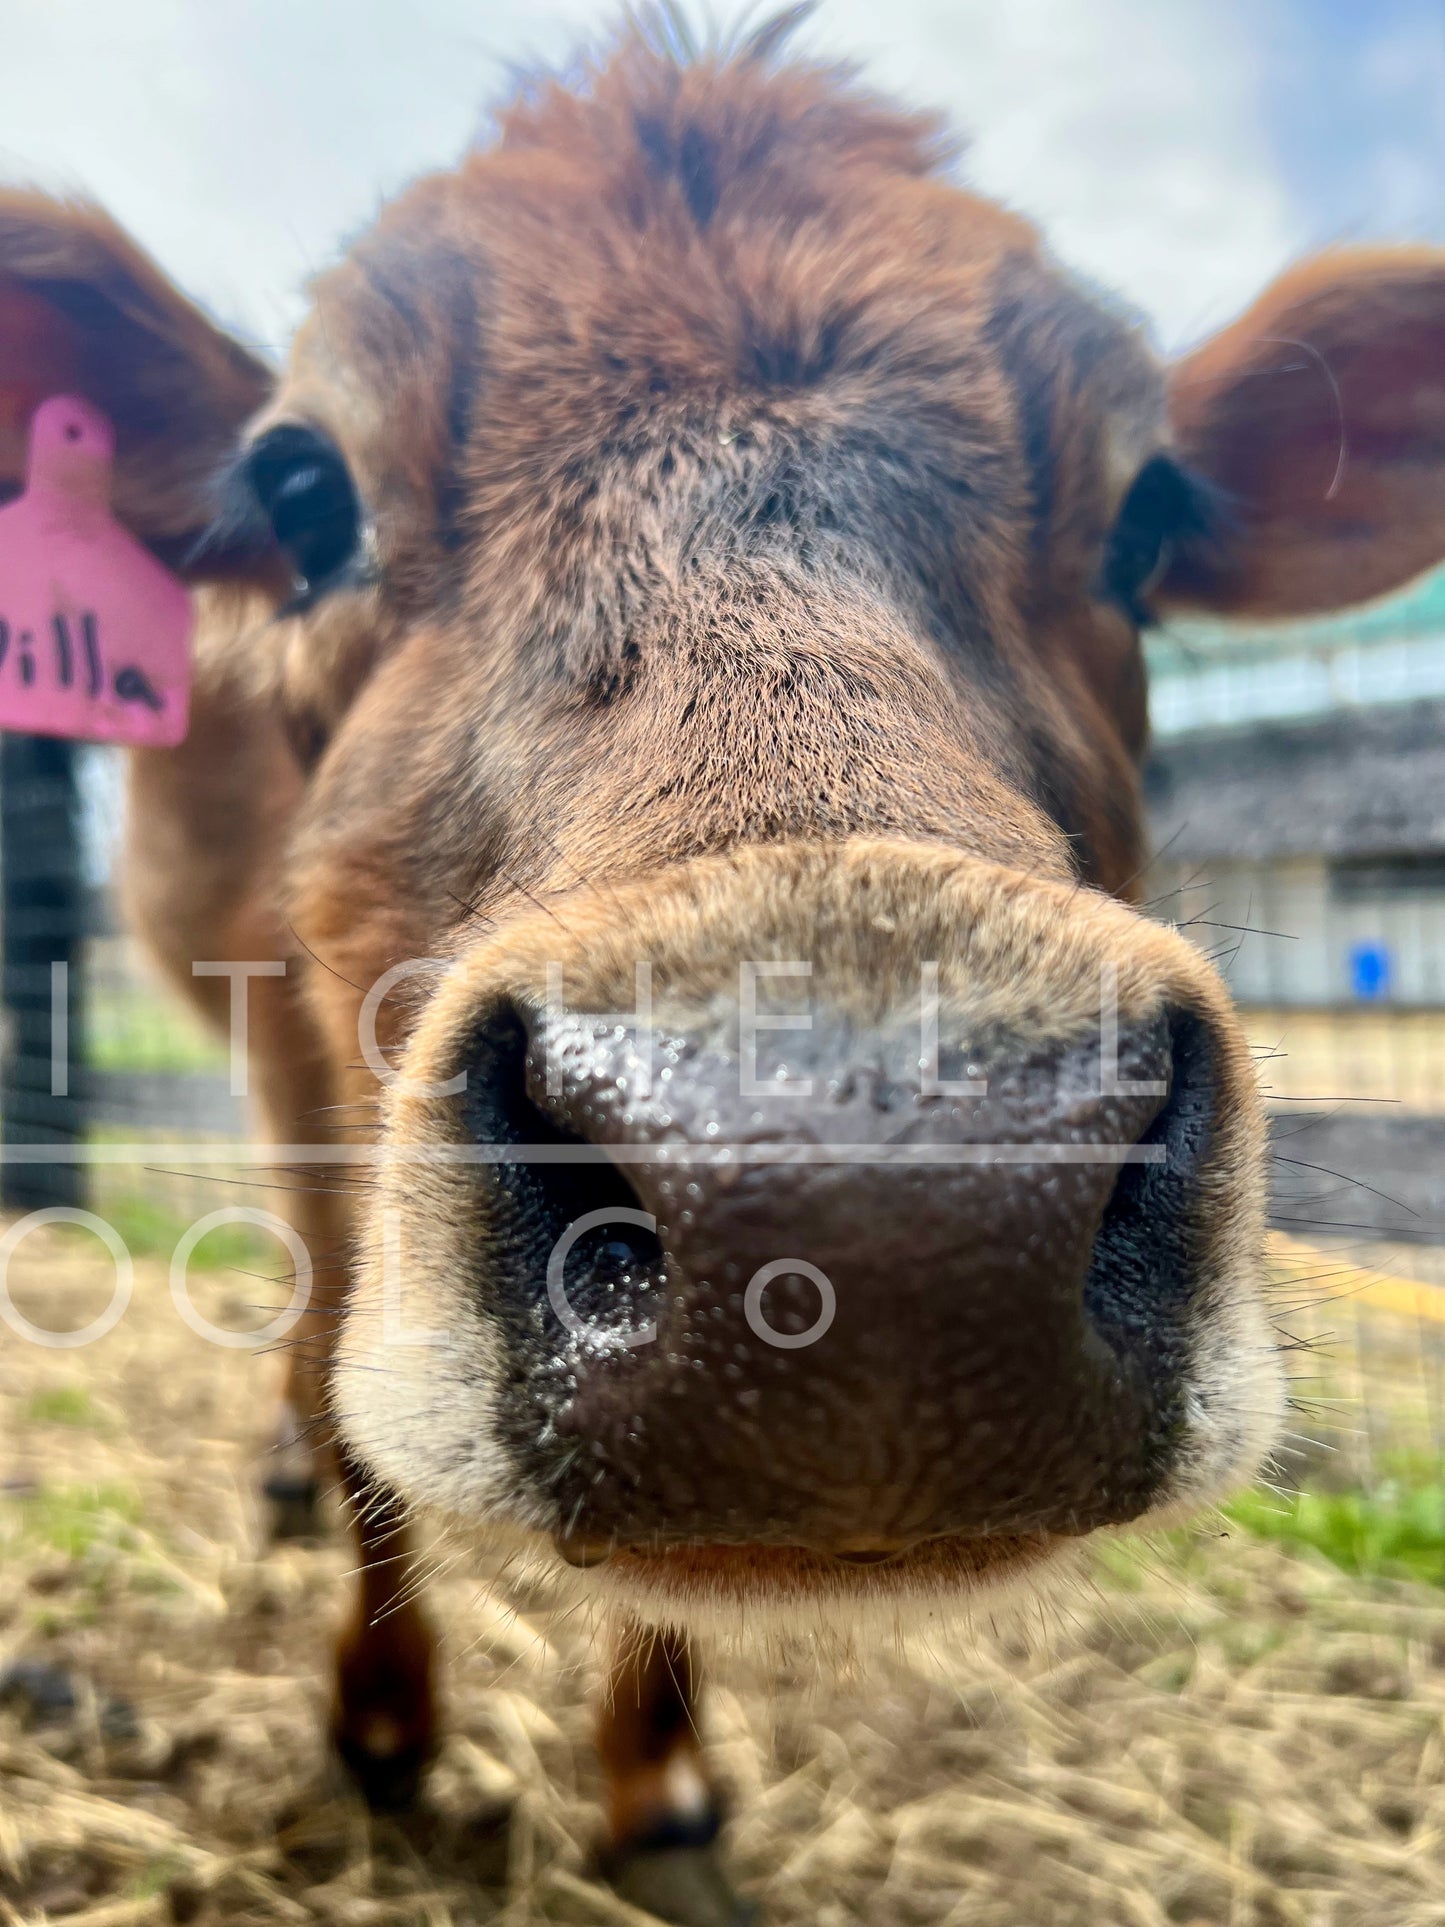 Nilla - One of our A2A2 Jersey Dairy Cows comes in for a BOOP! and a kiss. All cows should live like this!